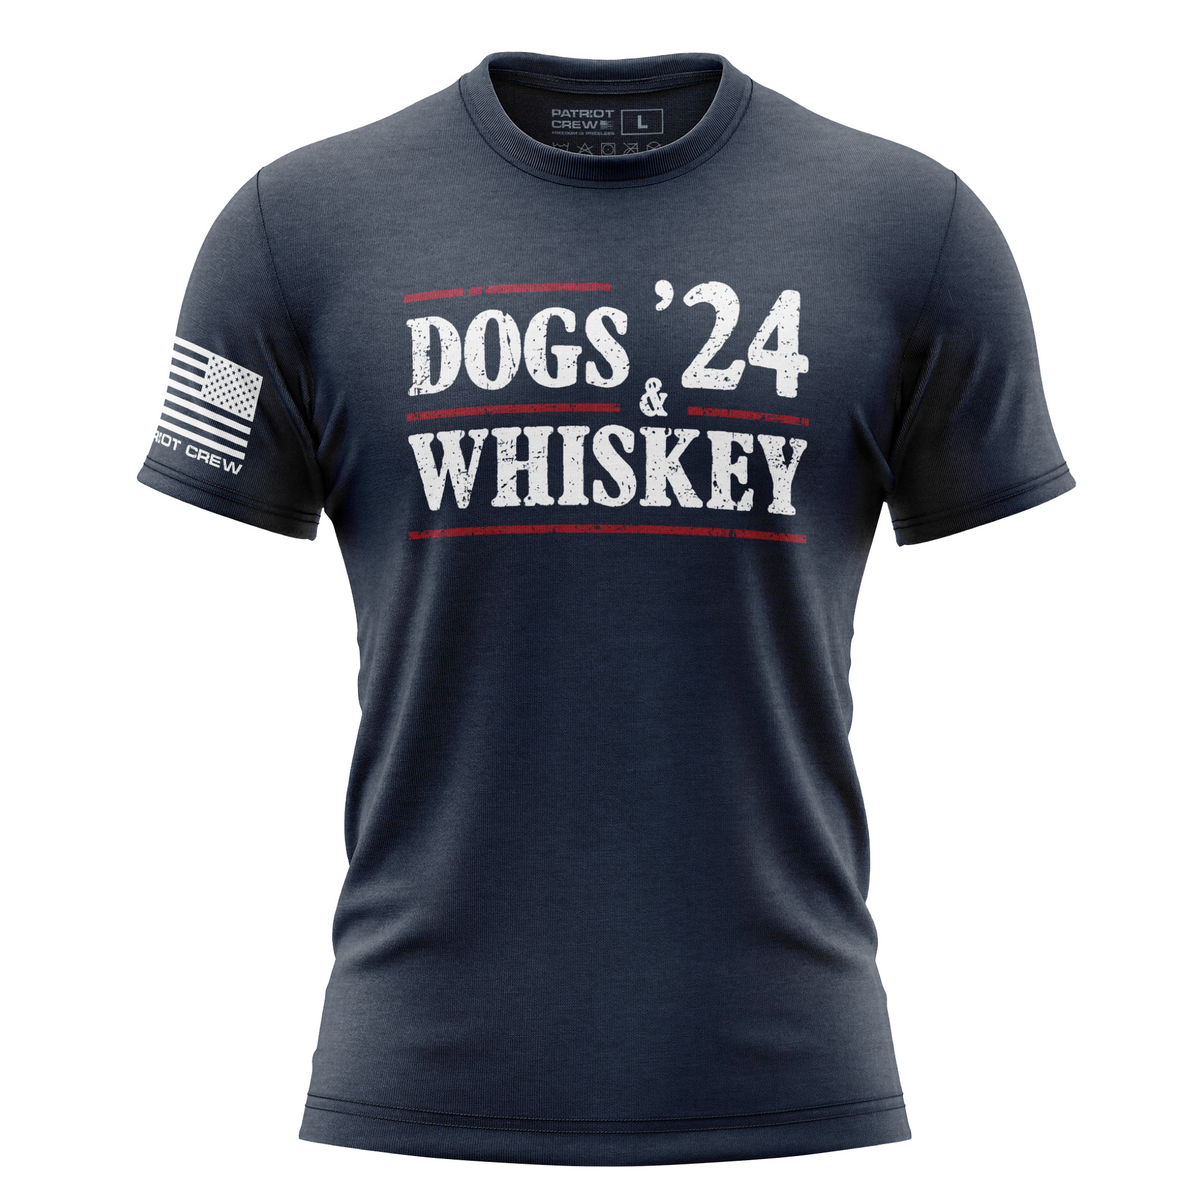 Dogs & Whiskey '24 T-Shirt